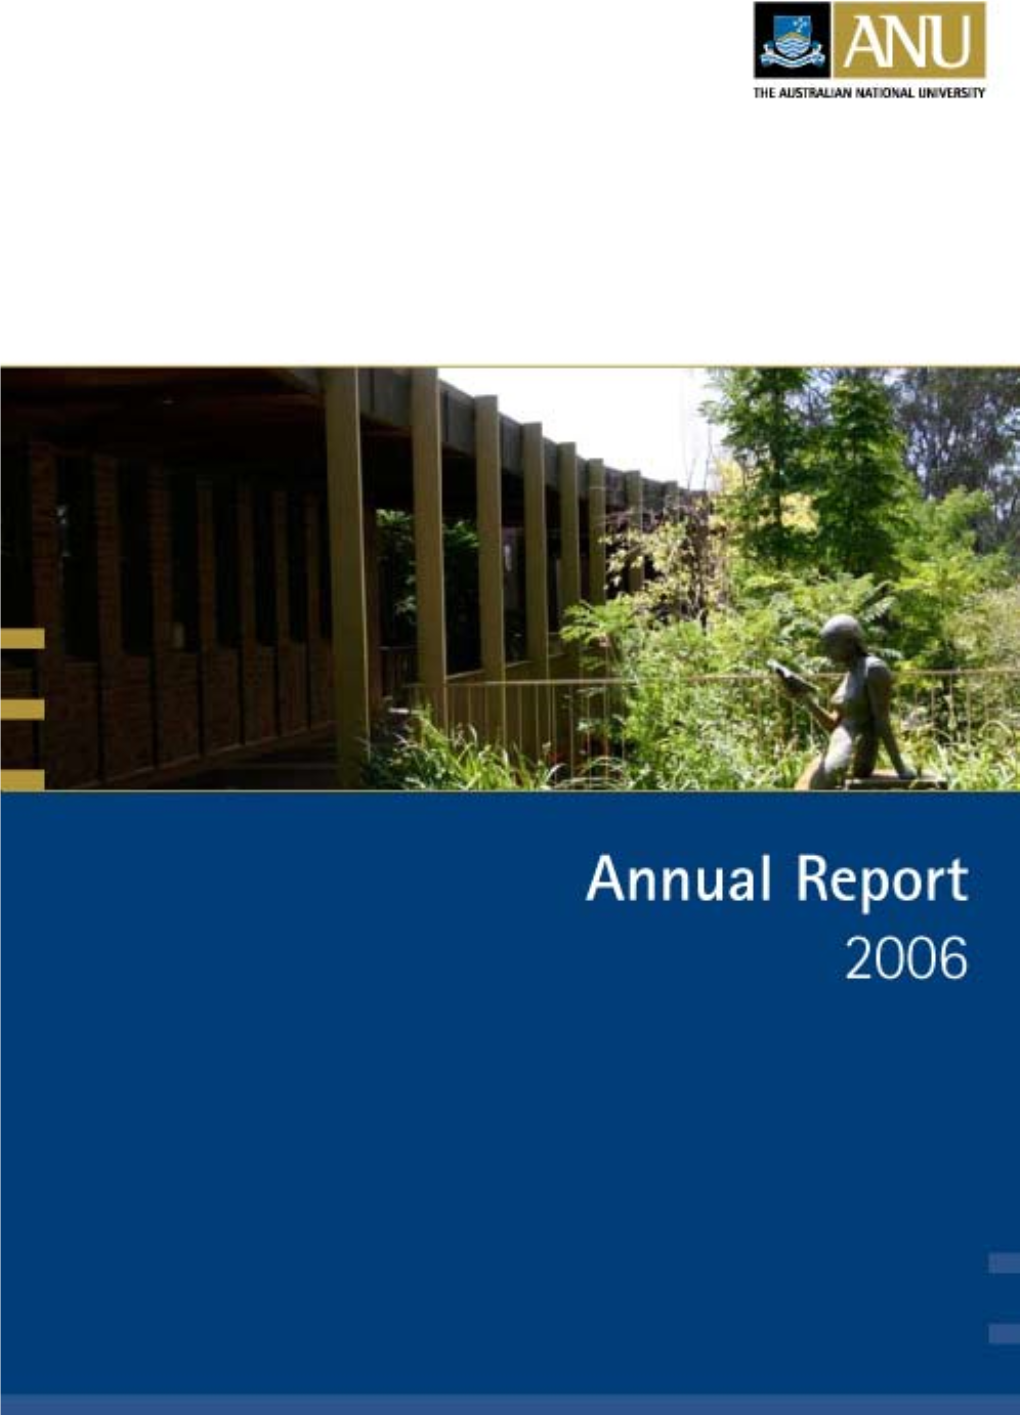 Annual Report 2006 Published by the Australian National University